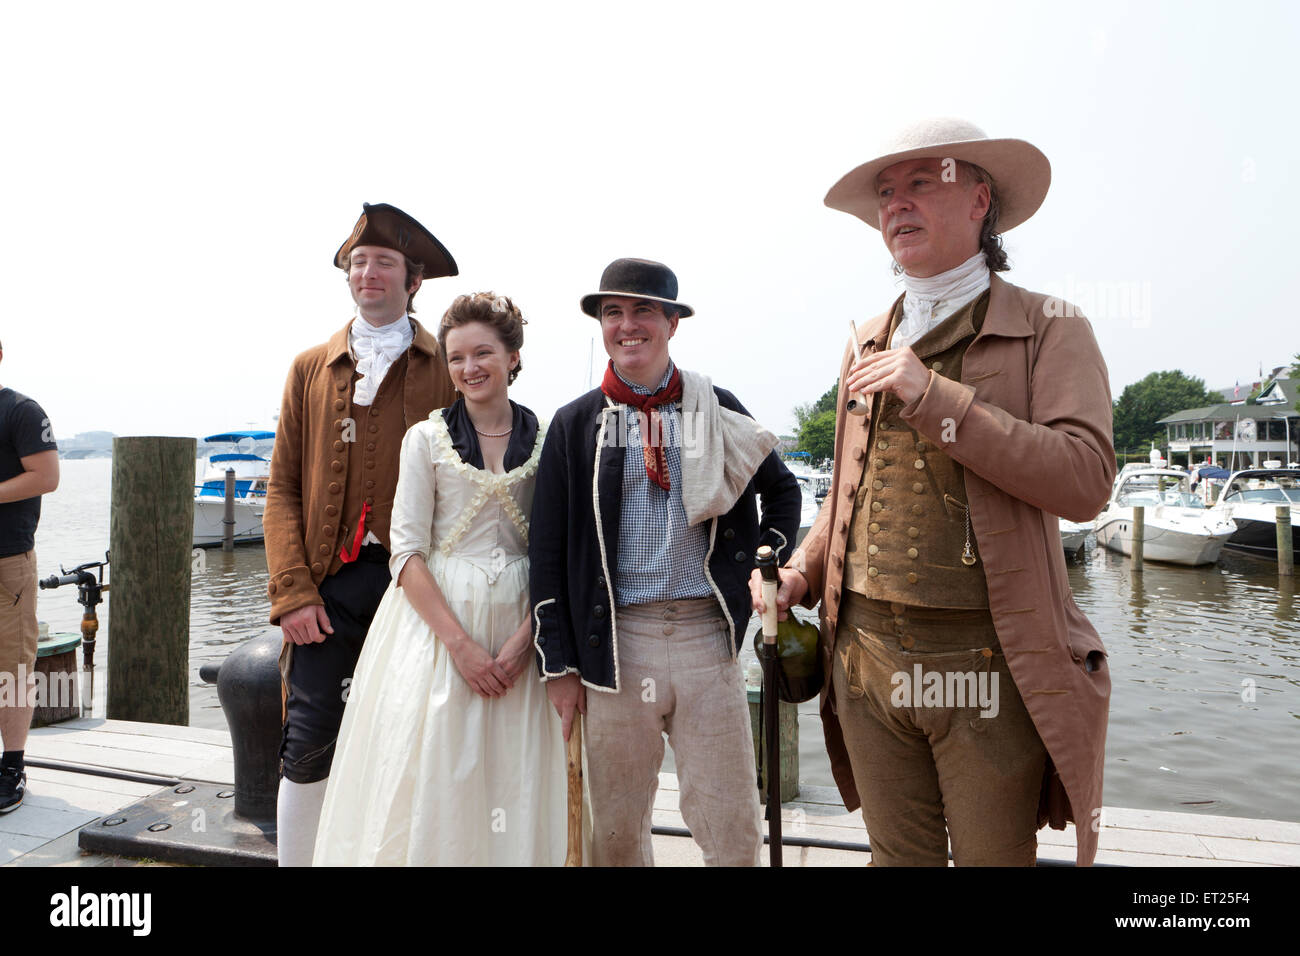 Family dressed in colonial period costume -Alexandria, Virginia USA Stock Photo